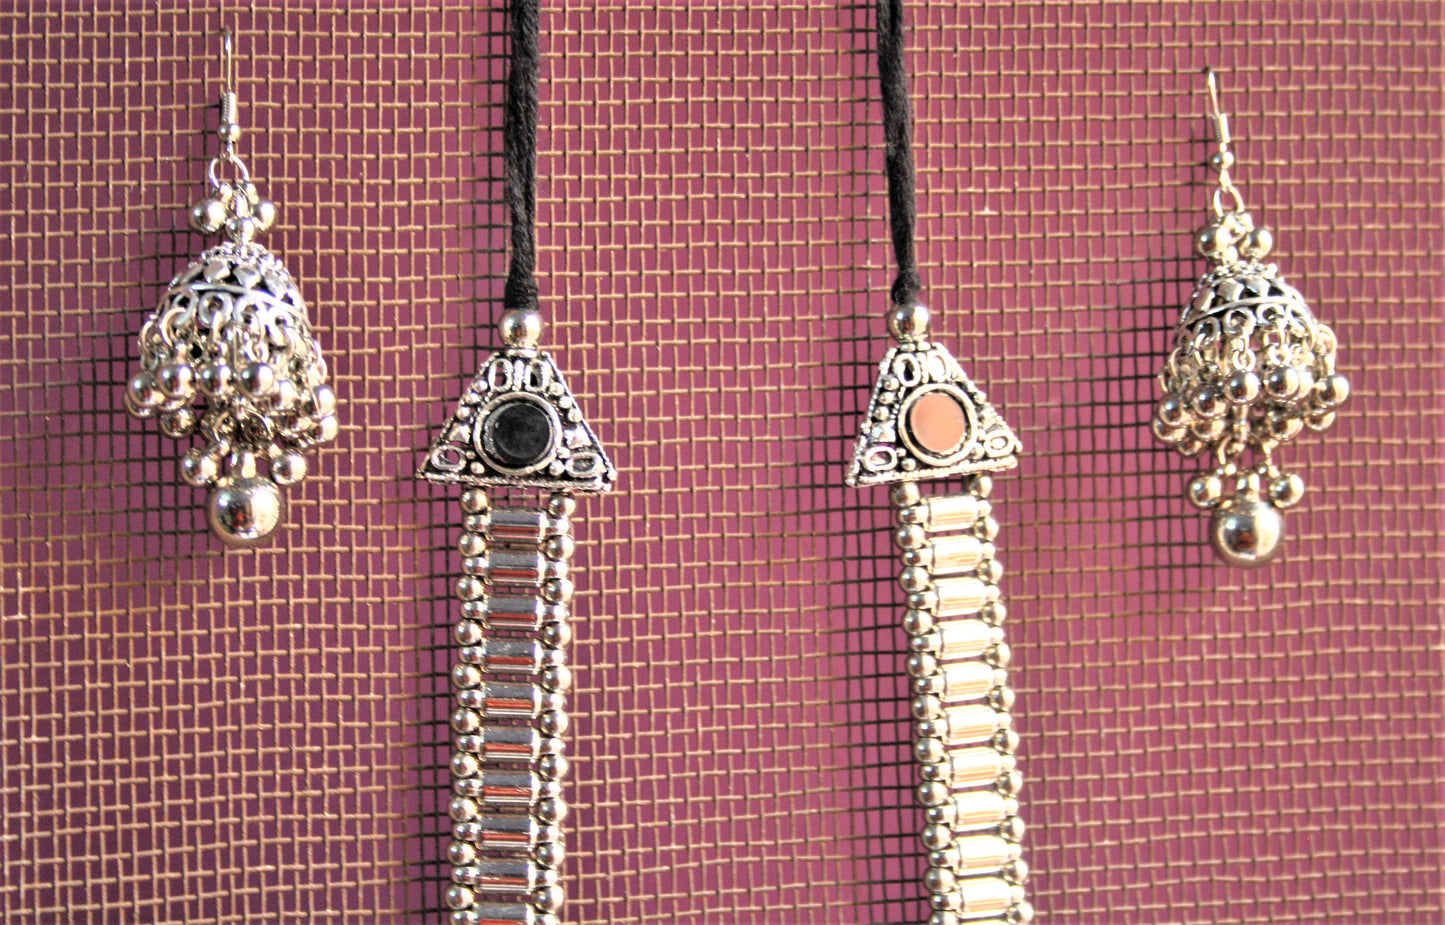 Traditional Long Silver Oxidized Necklace with Layered Multicolored Pendant and Jhumkis - GlitterGleam